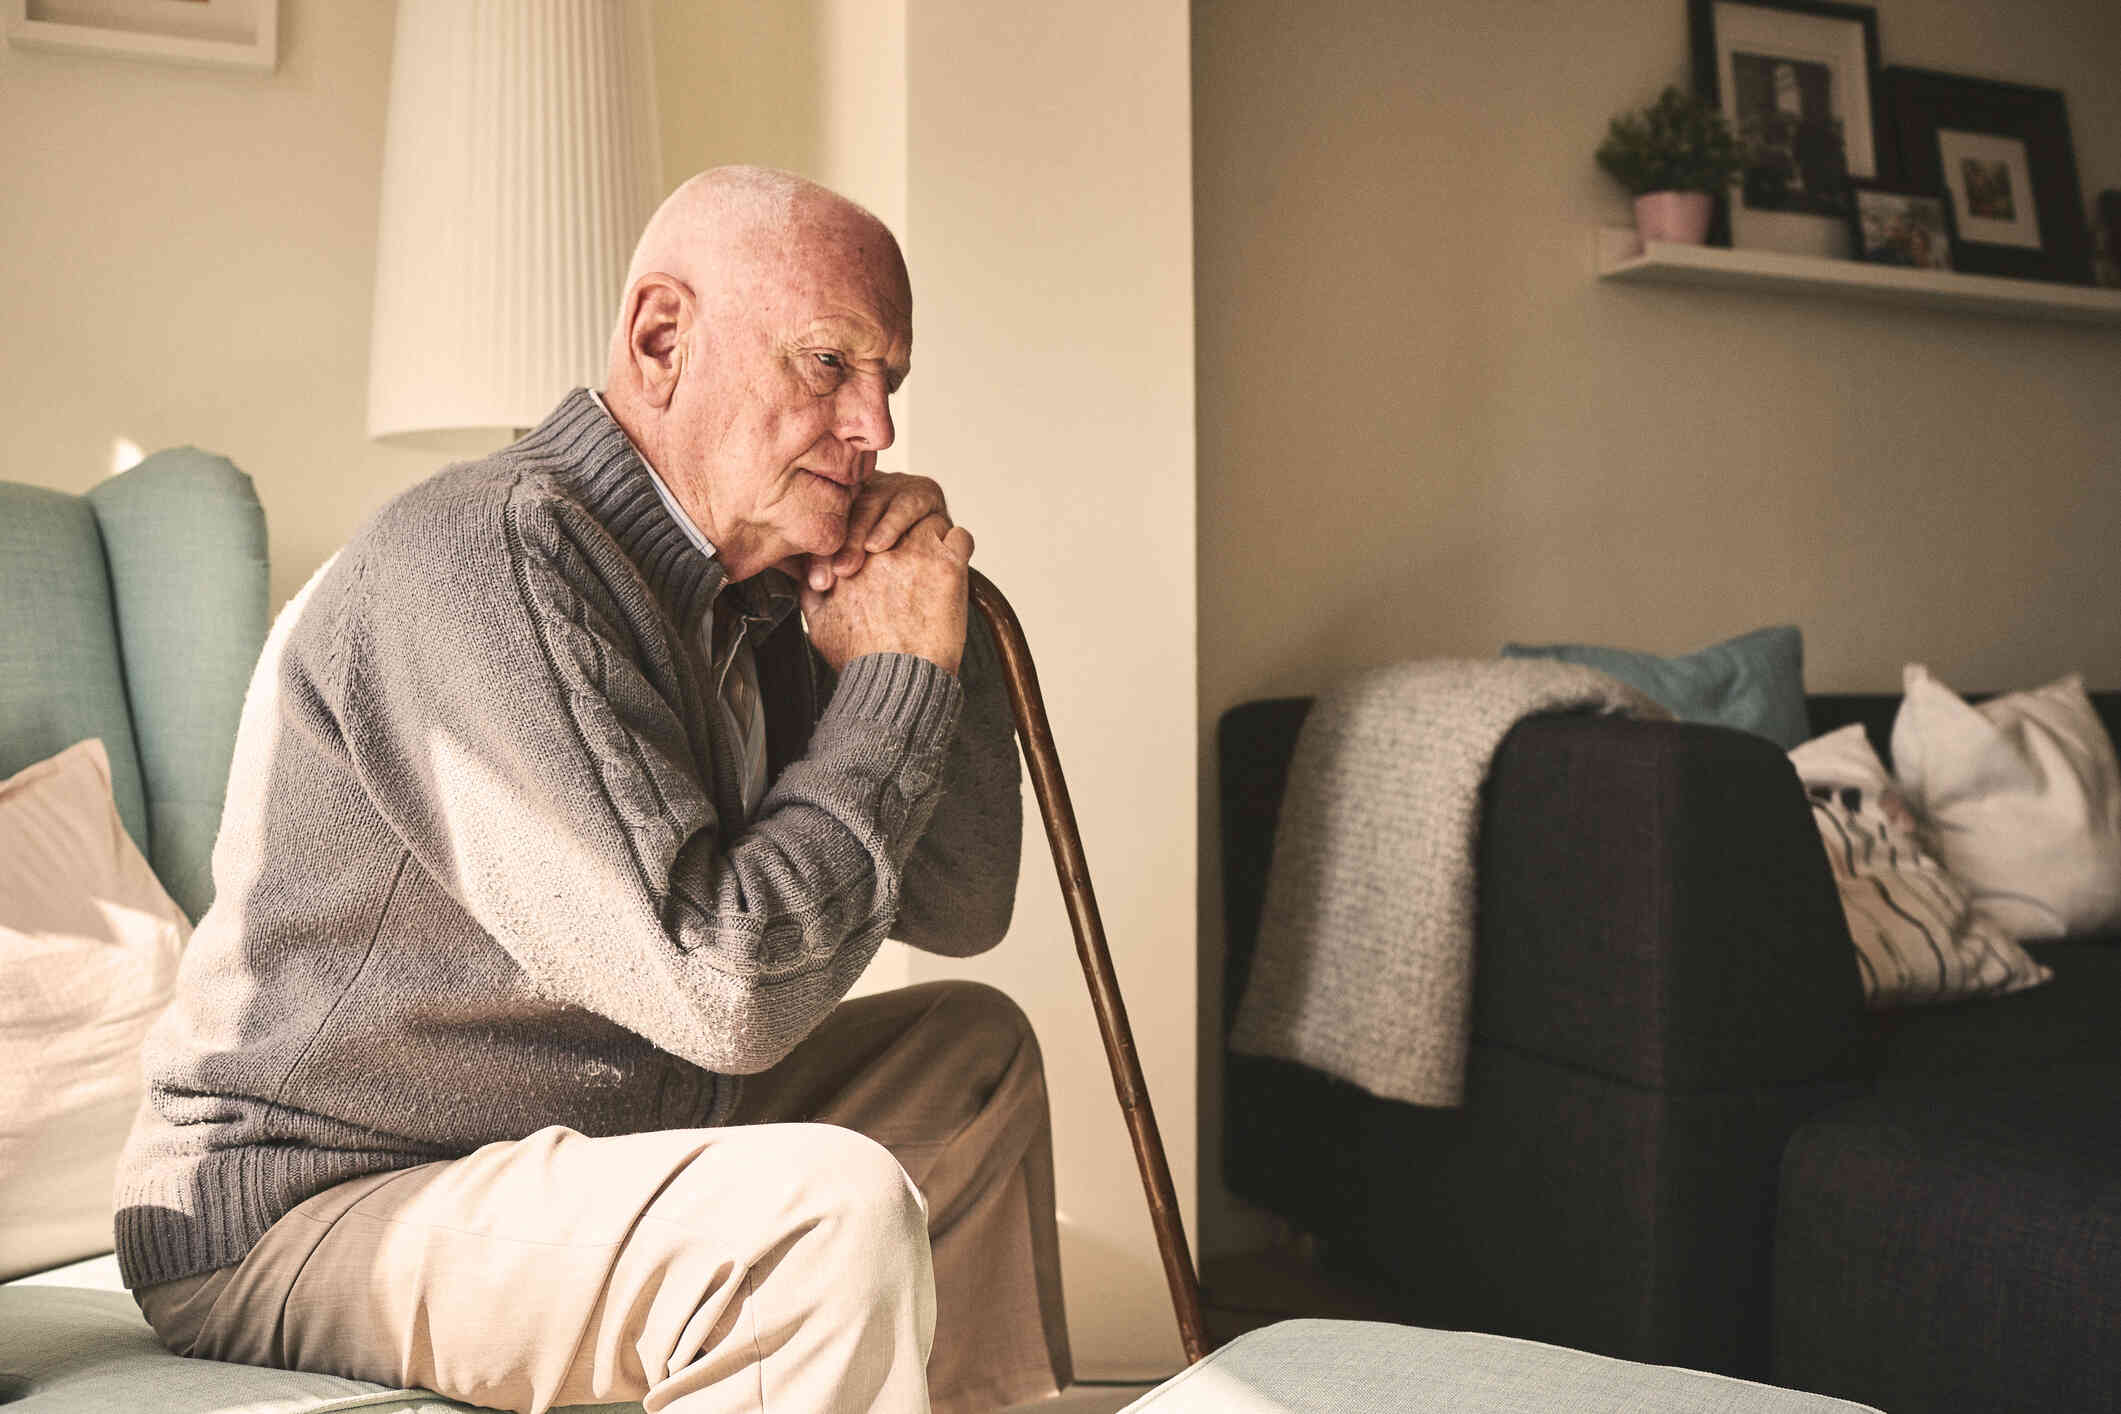 An old man in a sweater sits on a chair in his home and sadly leans against the cane in his hand with a sad expression.